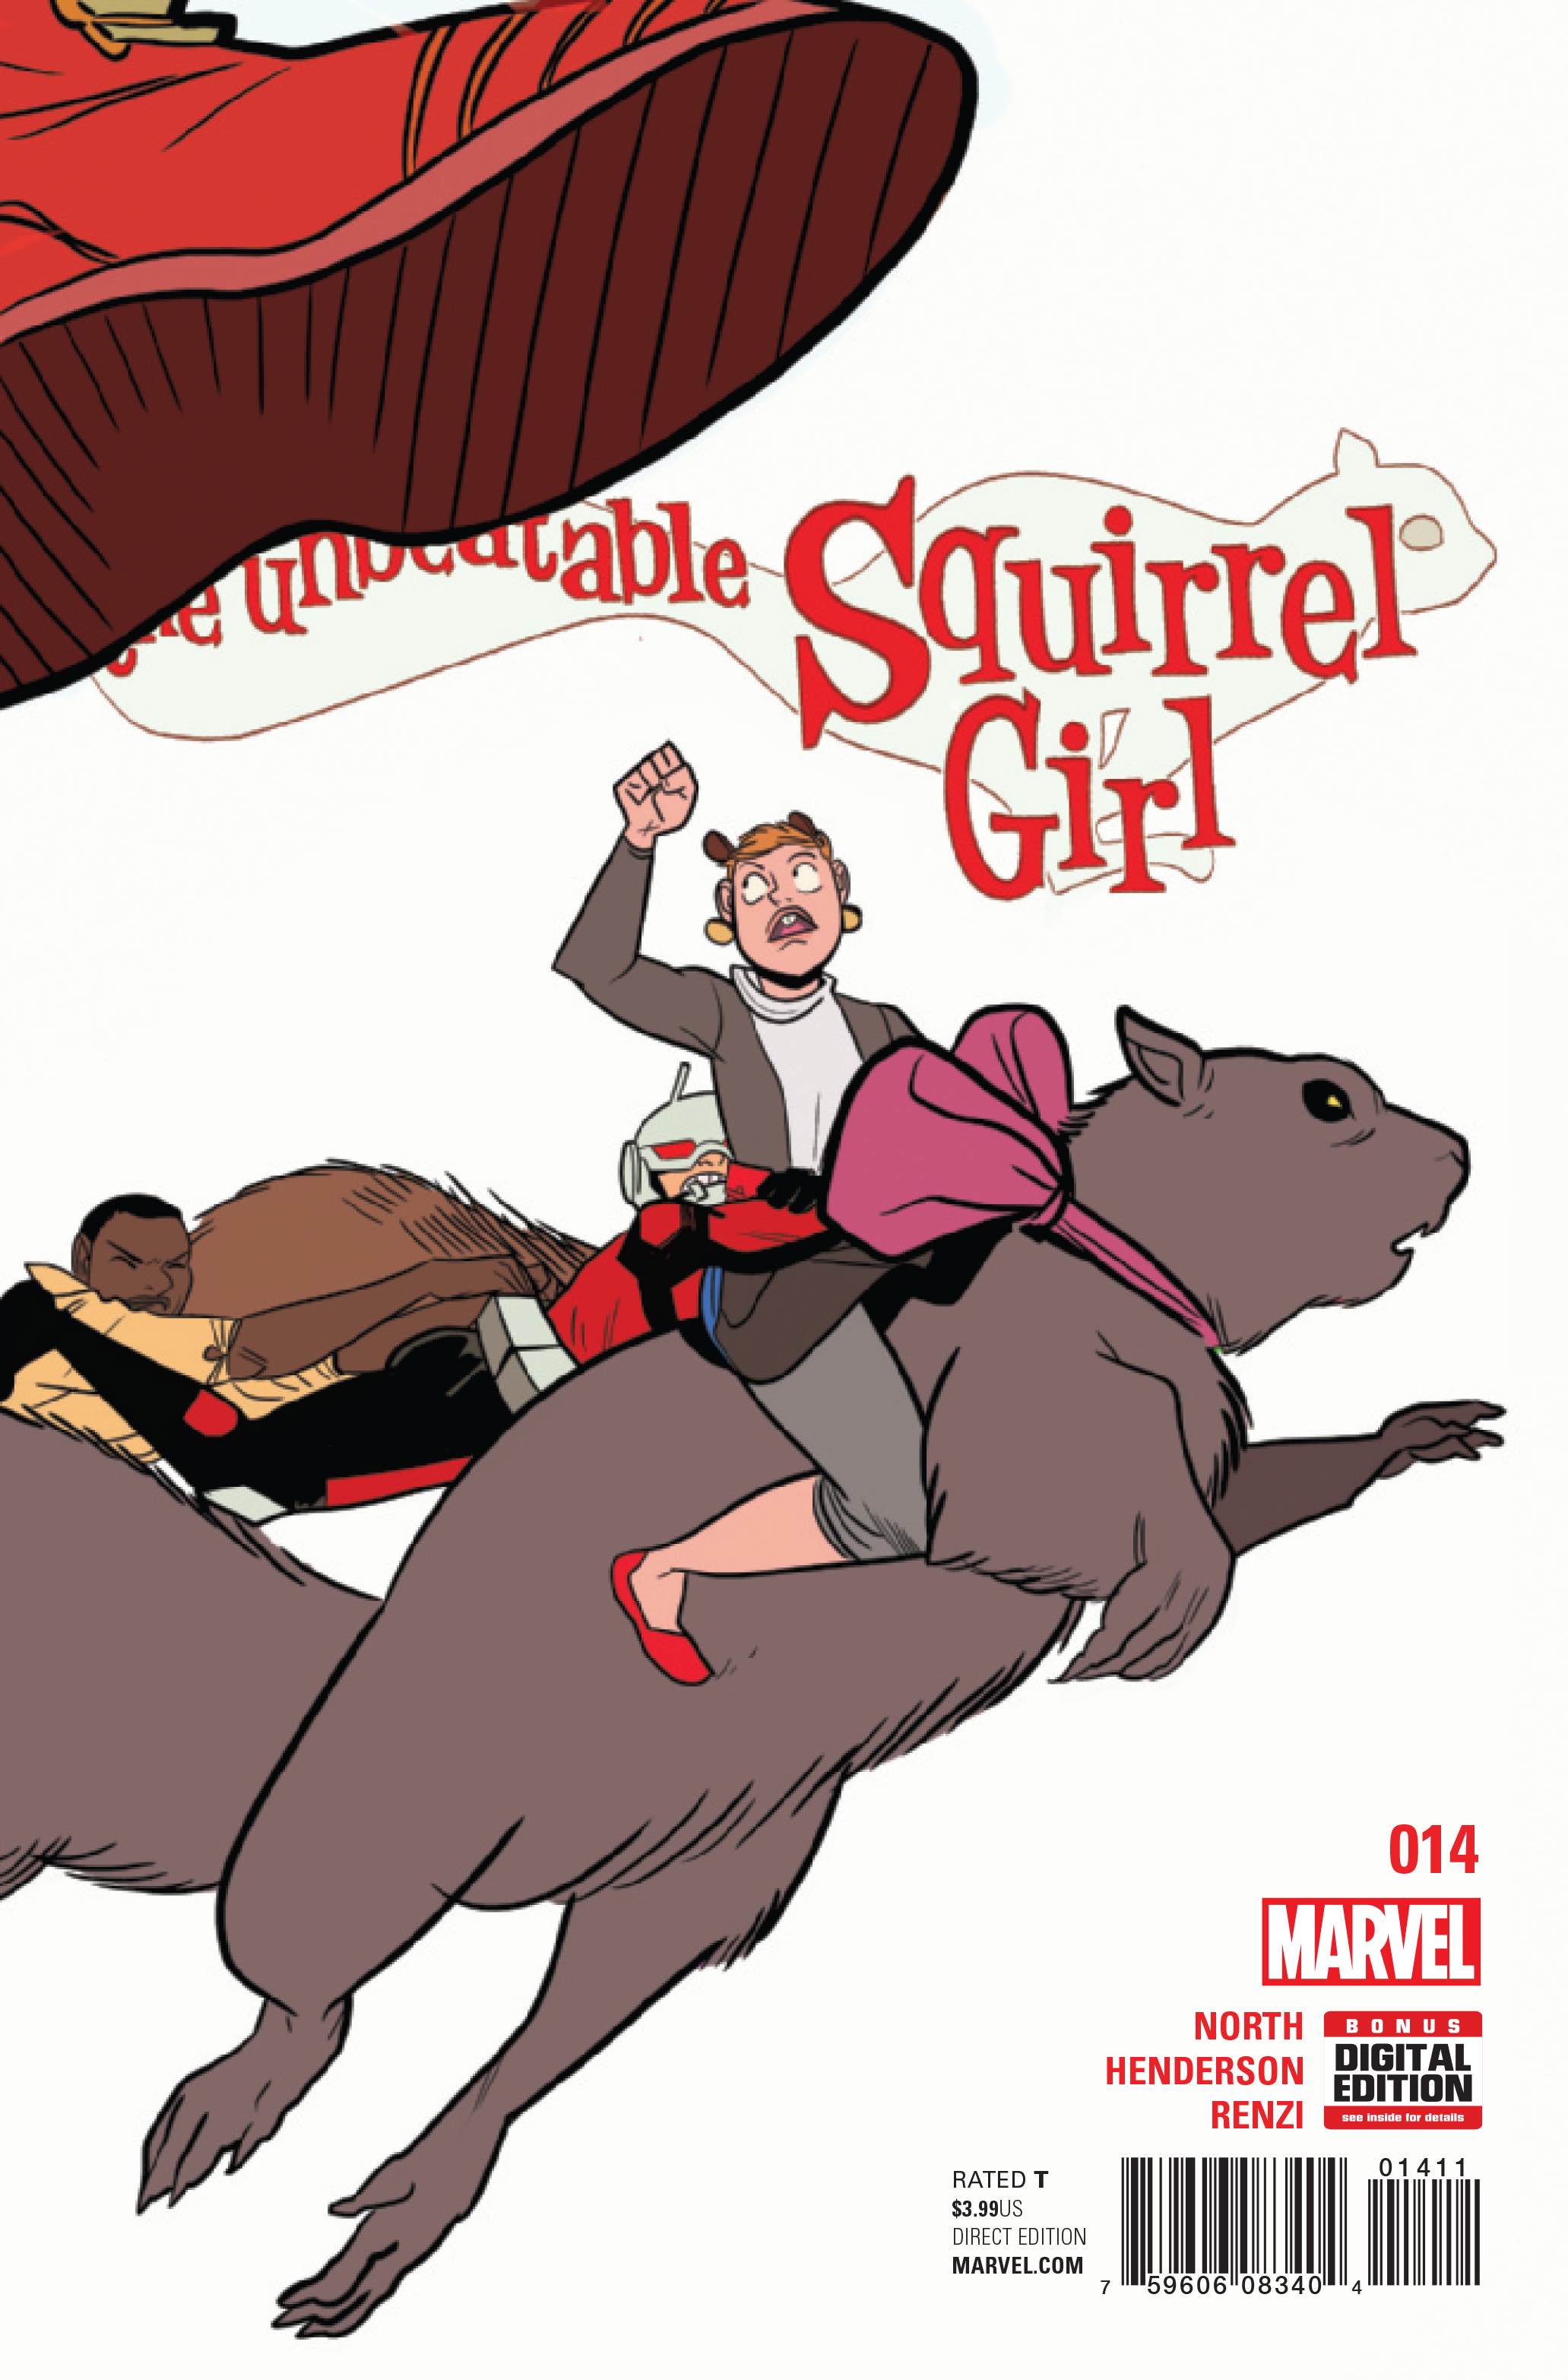 Unbeatable Squirrel Girl #14 Review